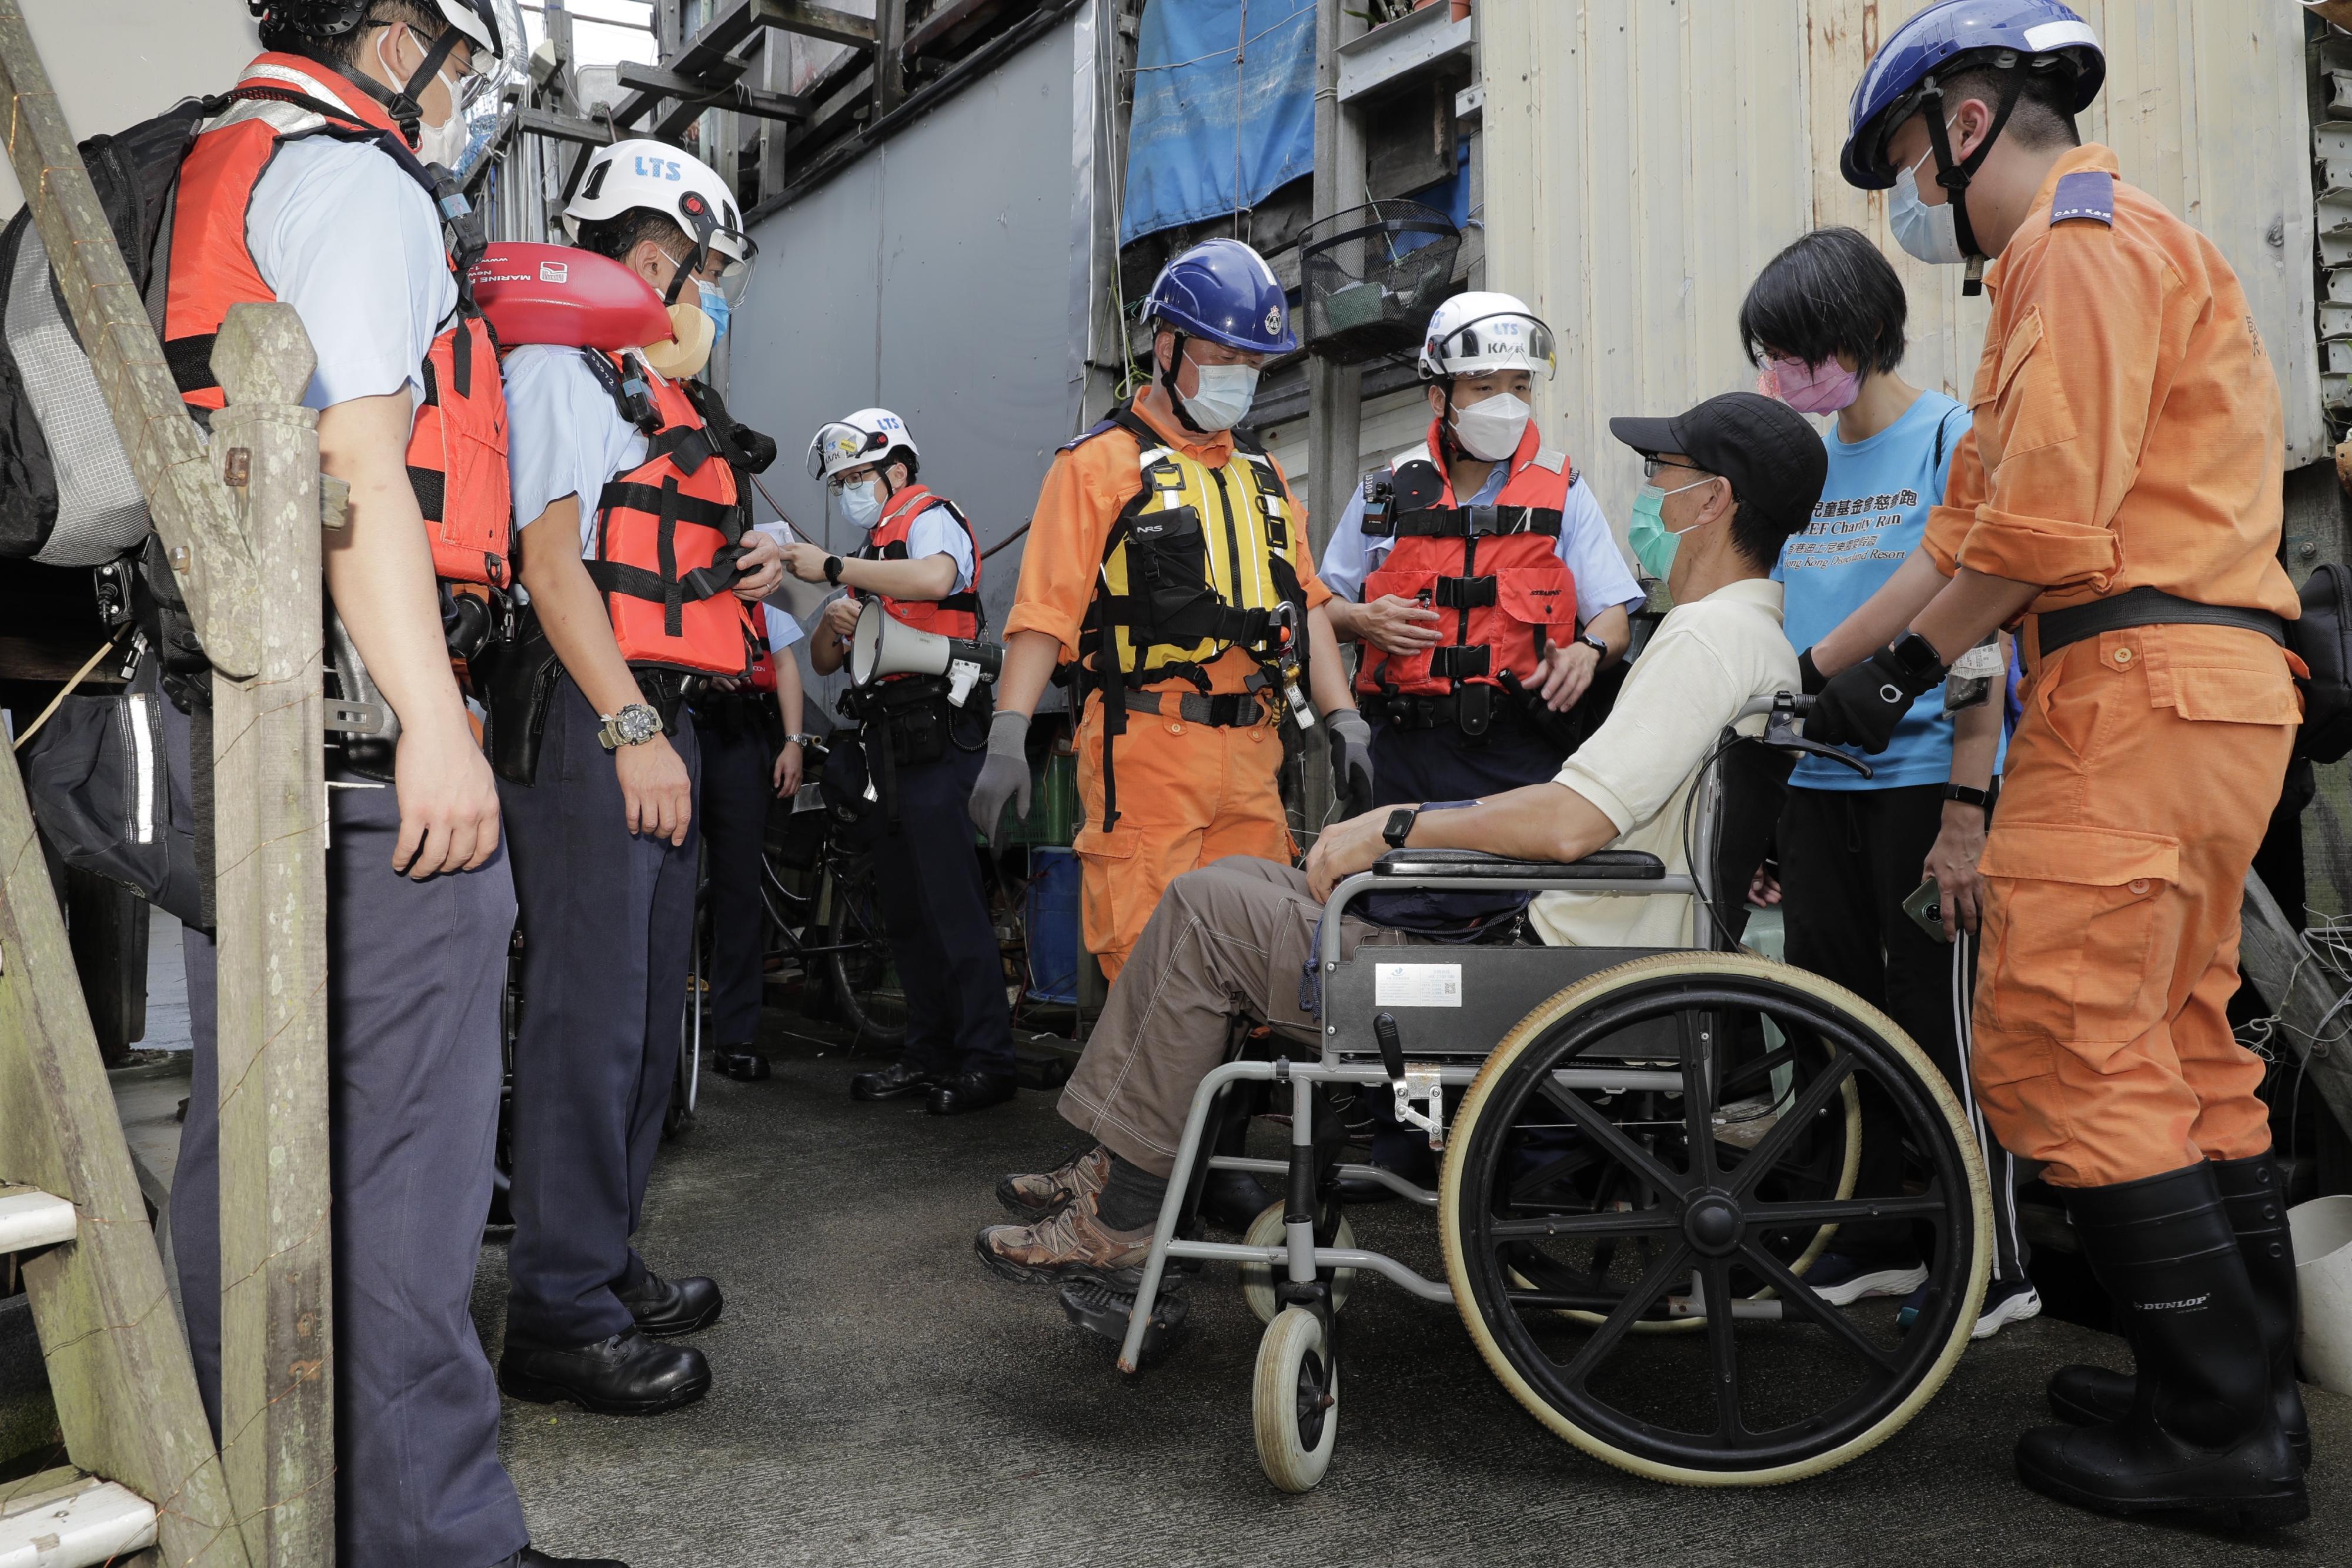 The Islands District Office conducted an inter-departmental rescue and evacuation drill on emergency response to flooding in Tai O today (June 16). Photo shows police officers and Civil Aid Service members rescuing a trapped resident who called for assistance during the drill.